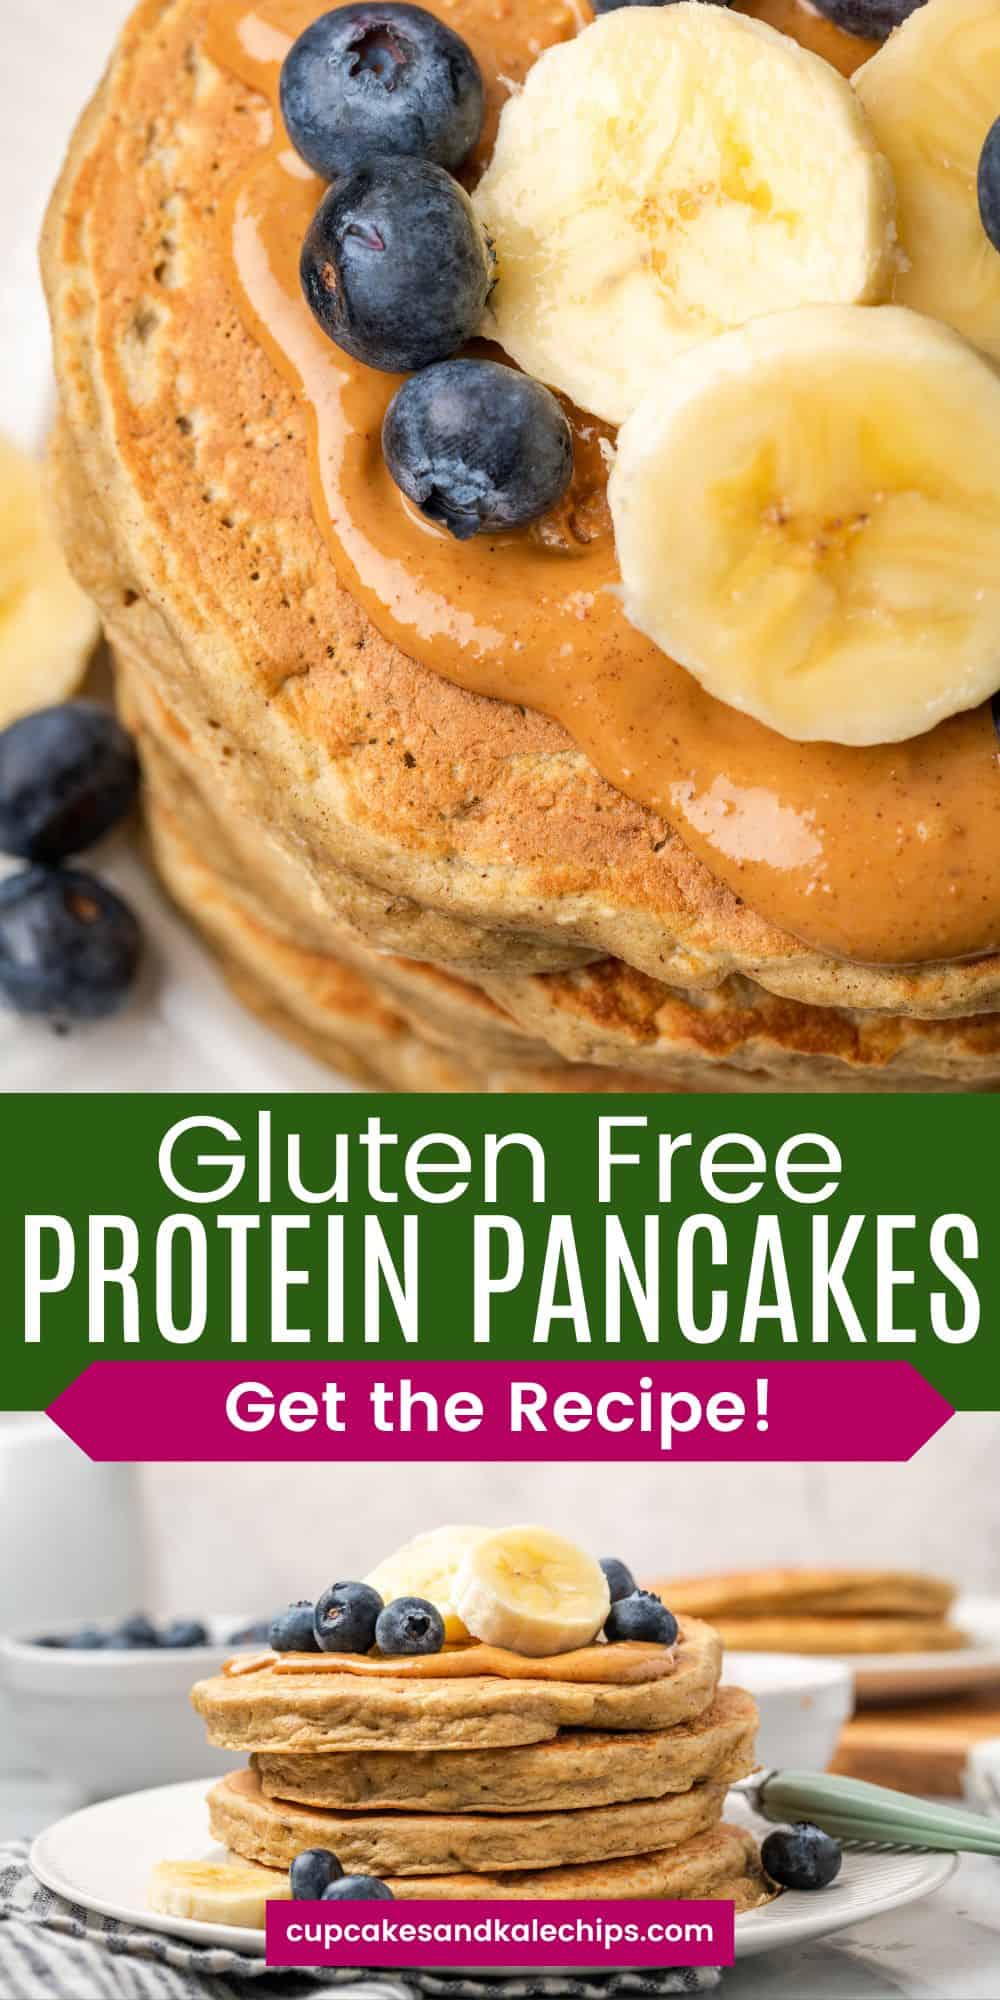 Gluten-Free Protein Pancakes | Cupcakes and Kale Chips